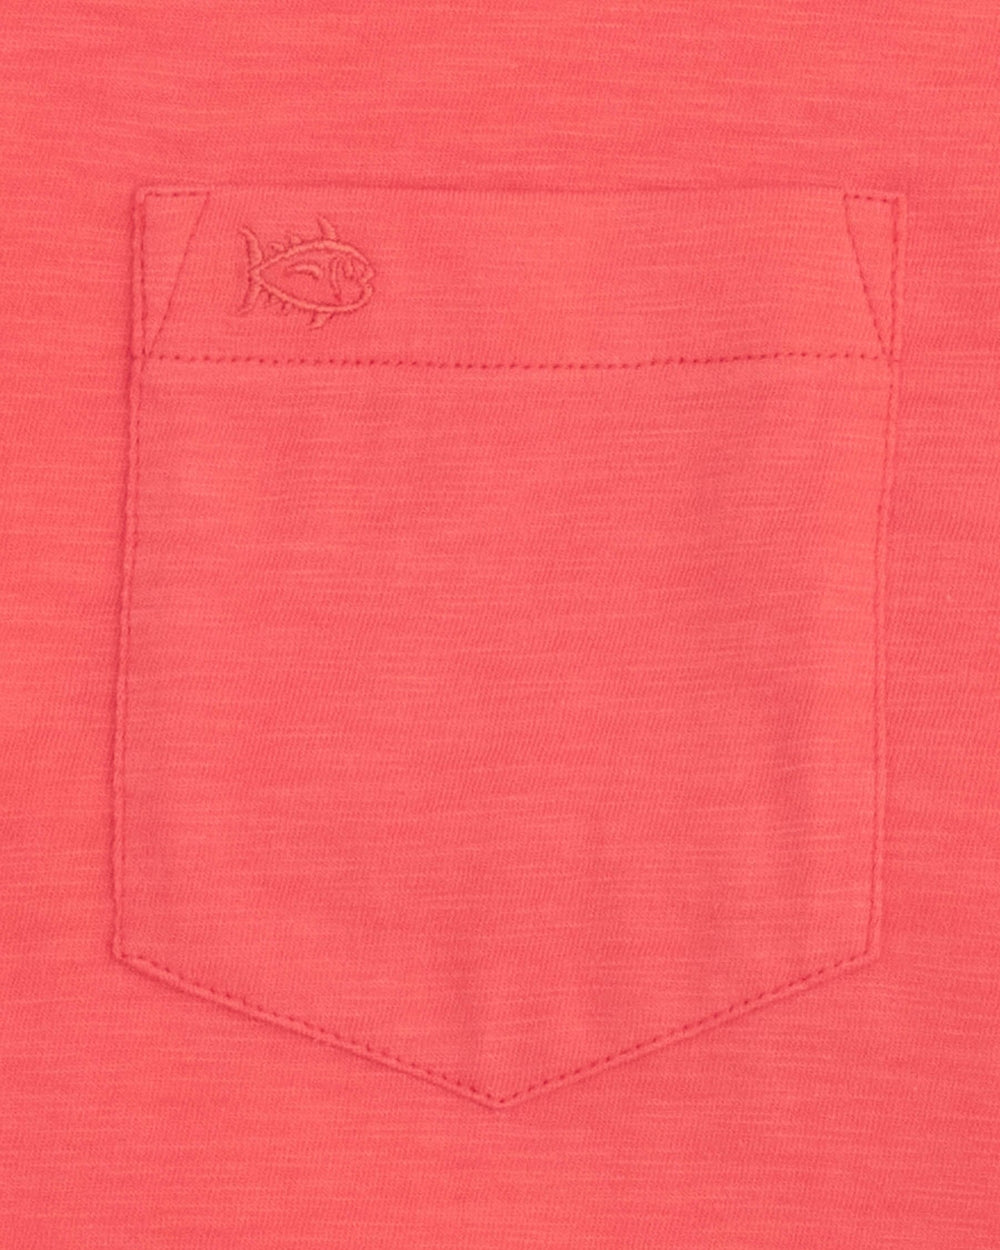 The detail view of the Southern Tide Sun Farer Short Sleeve T-Shirt by Southern Tide - Sunkist Coral